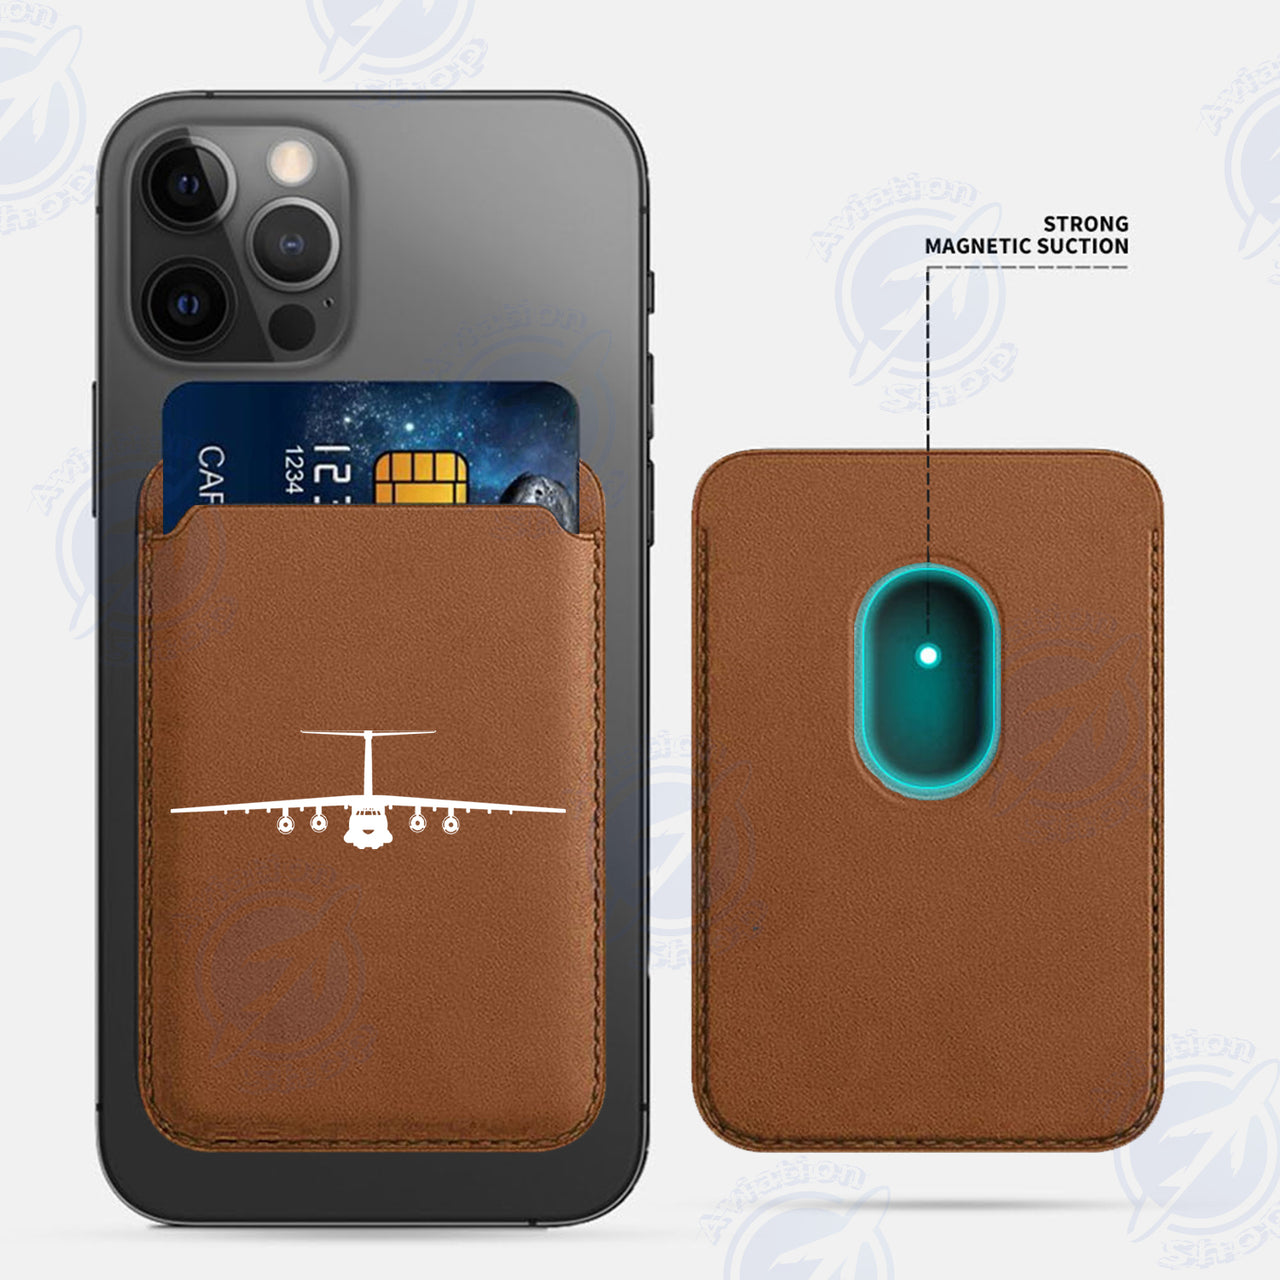 Ilyushin IL-76 Silhouette iPhone Cases Magnetic Card Wallet